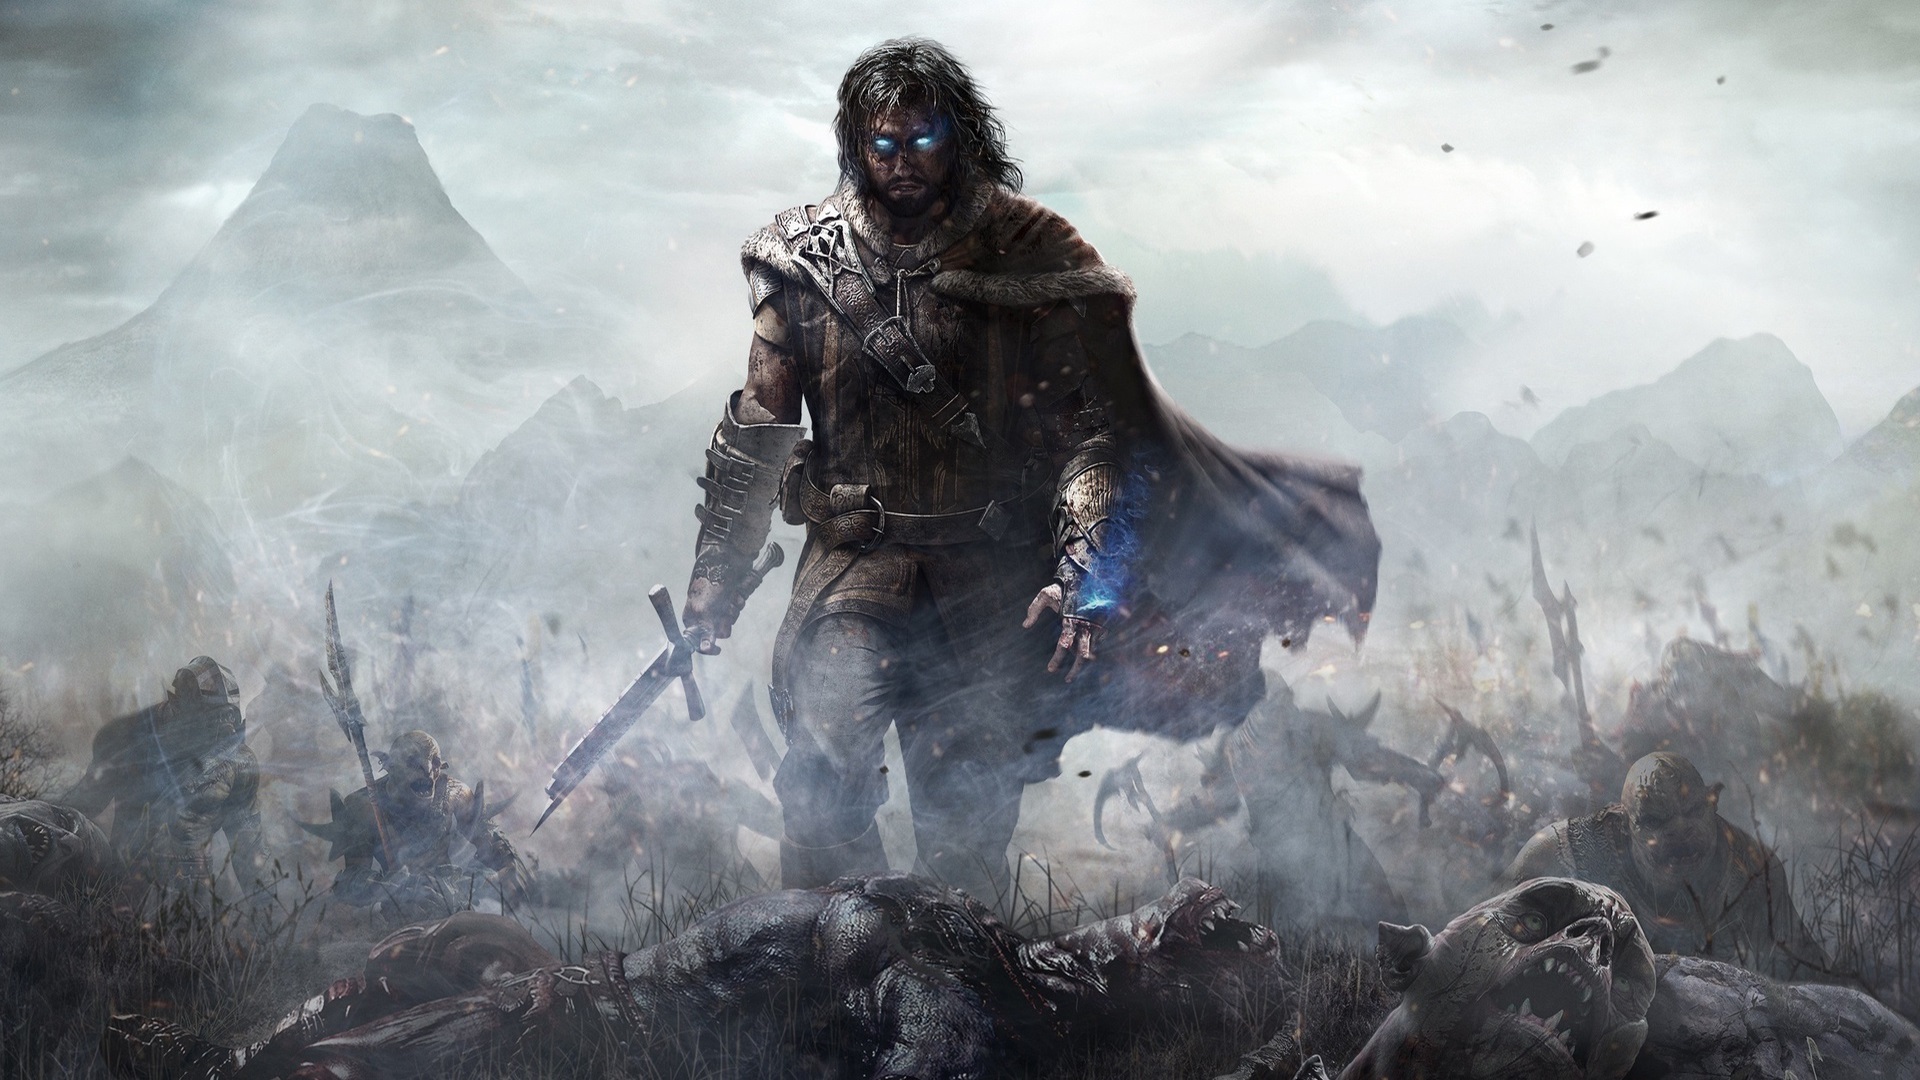 Middle Earth Shadow Of Mordor Video Games The Lord Of The Rings Artwork Fantasy Art Orc Orcs Men Swo 1920x1080